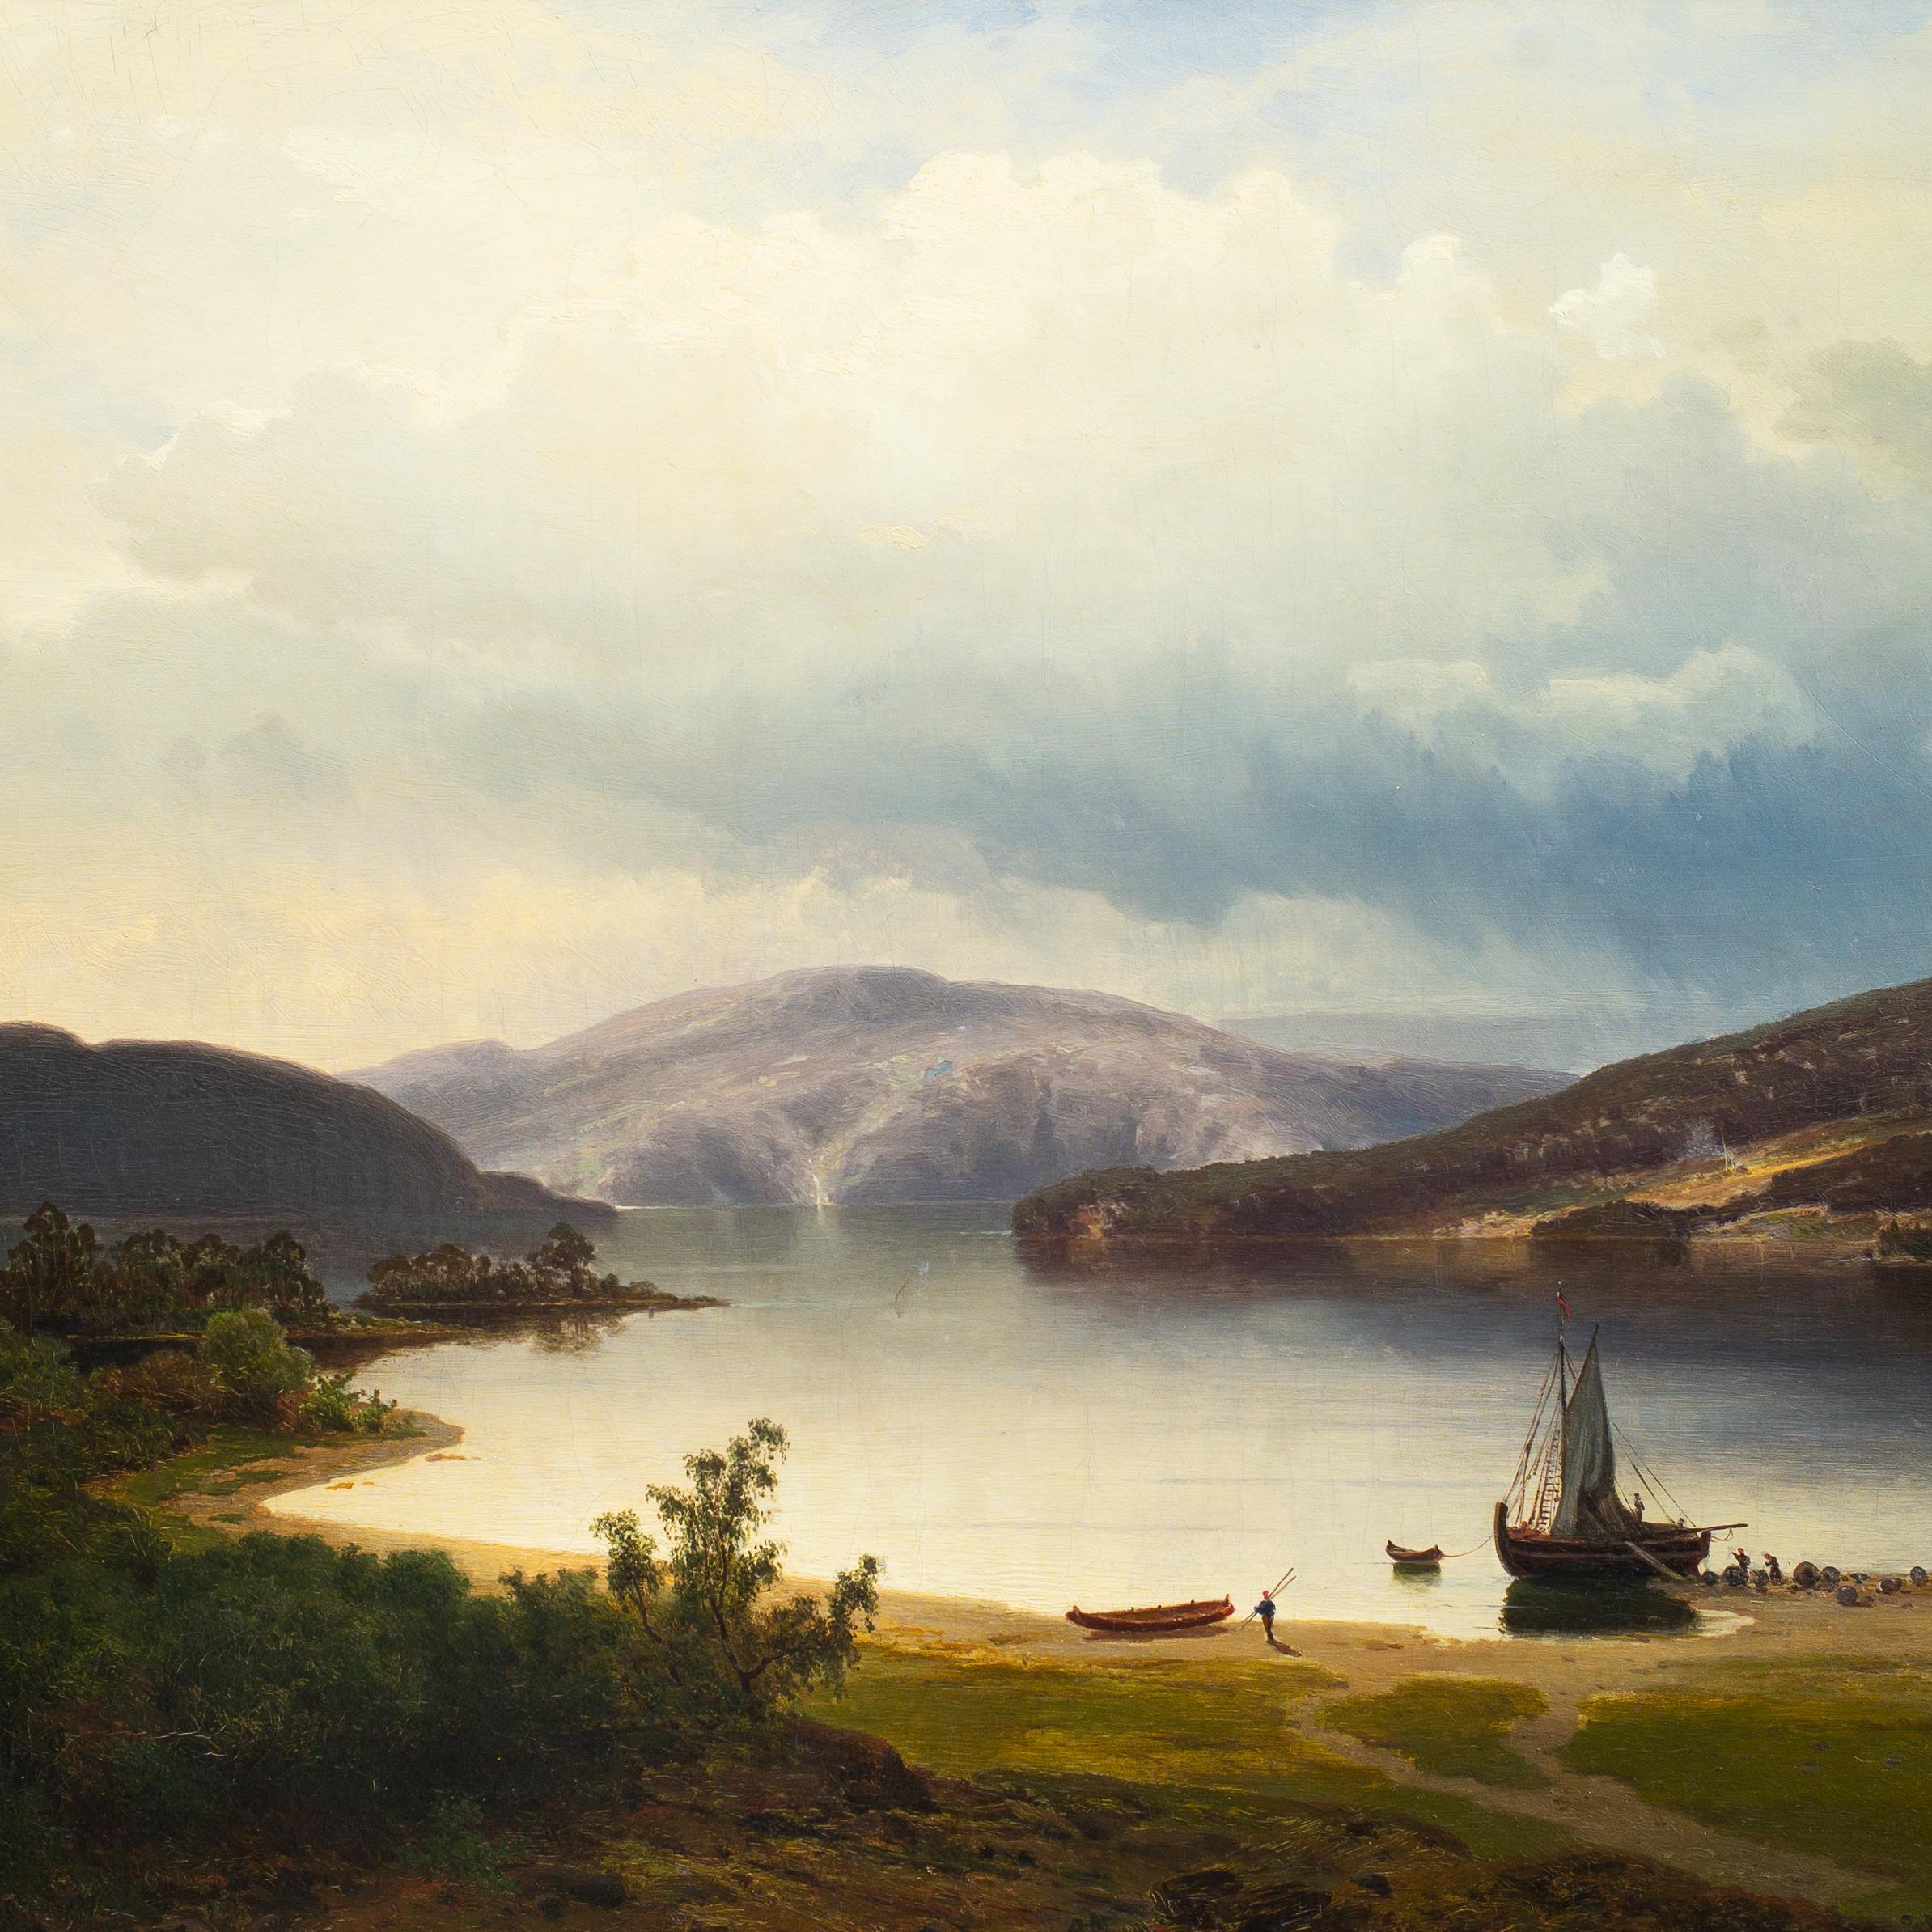 Setting Out in the Fjords 1858 by Swedish Artist Axel Nordgren, Oil on Canvas 2